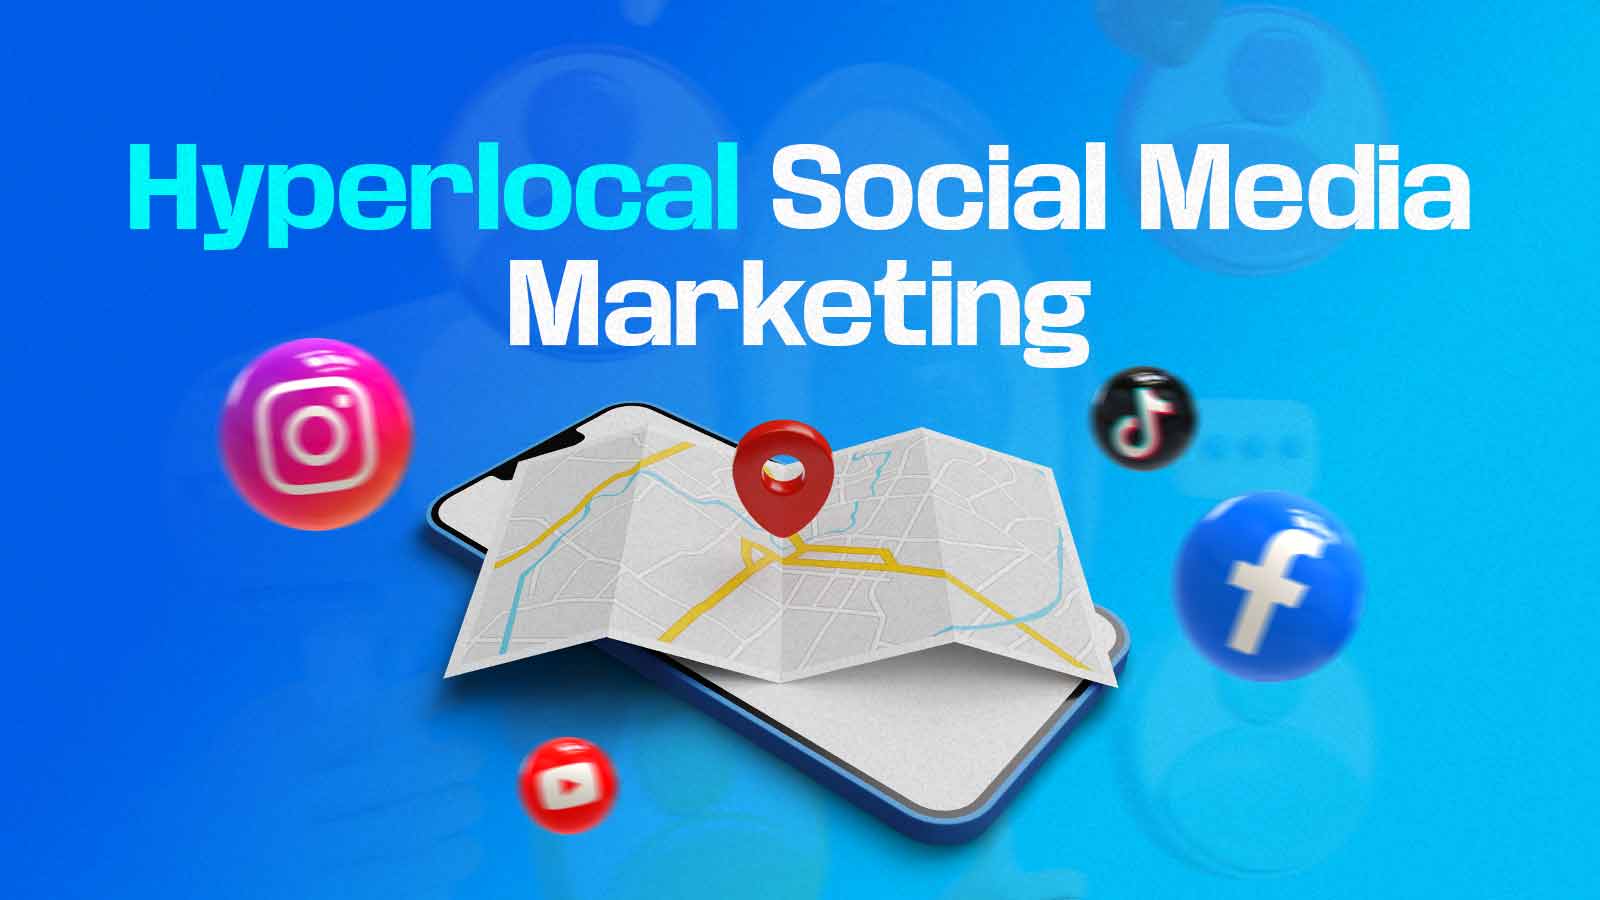 Hyperlocal Social Media Marketing For Local Business: How To Implement It?